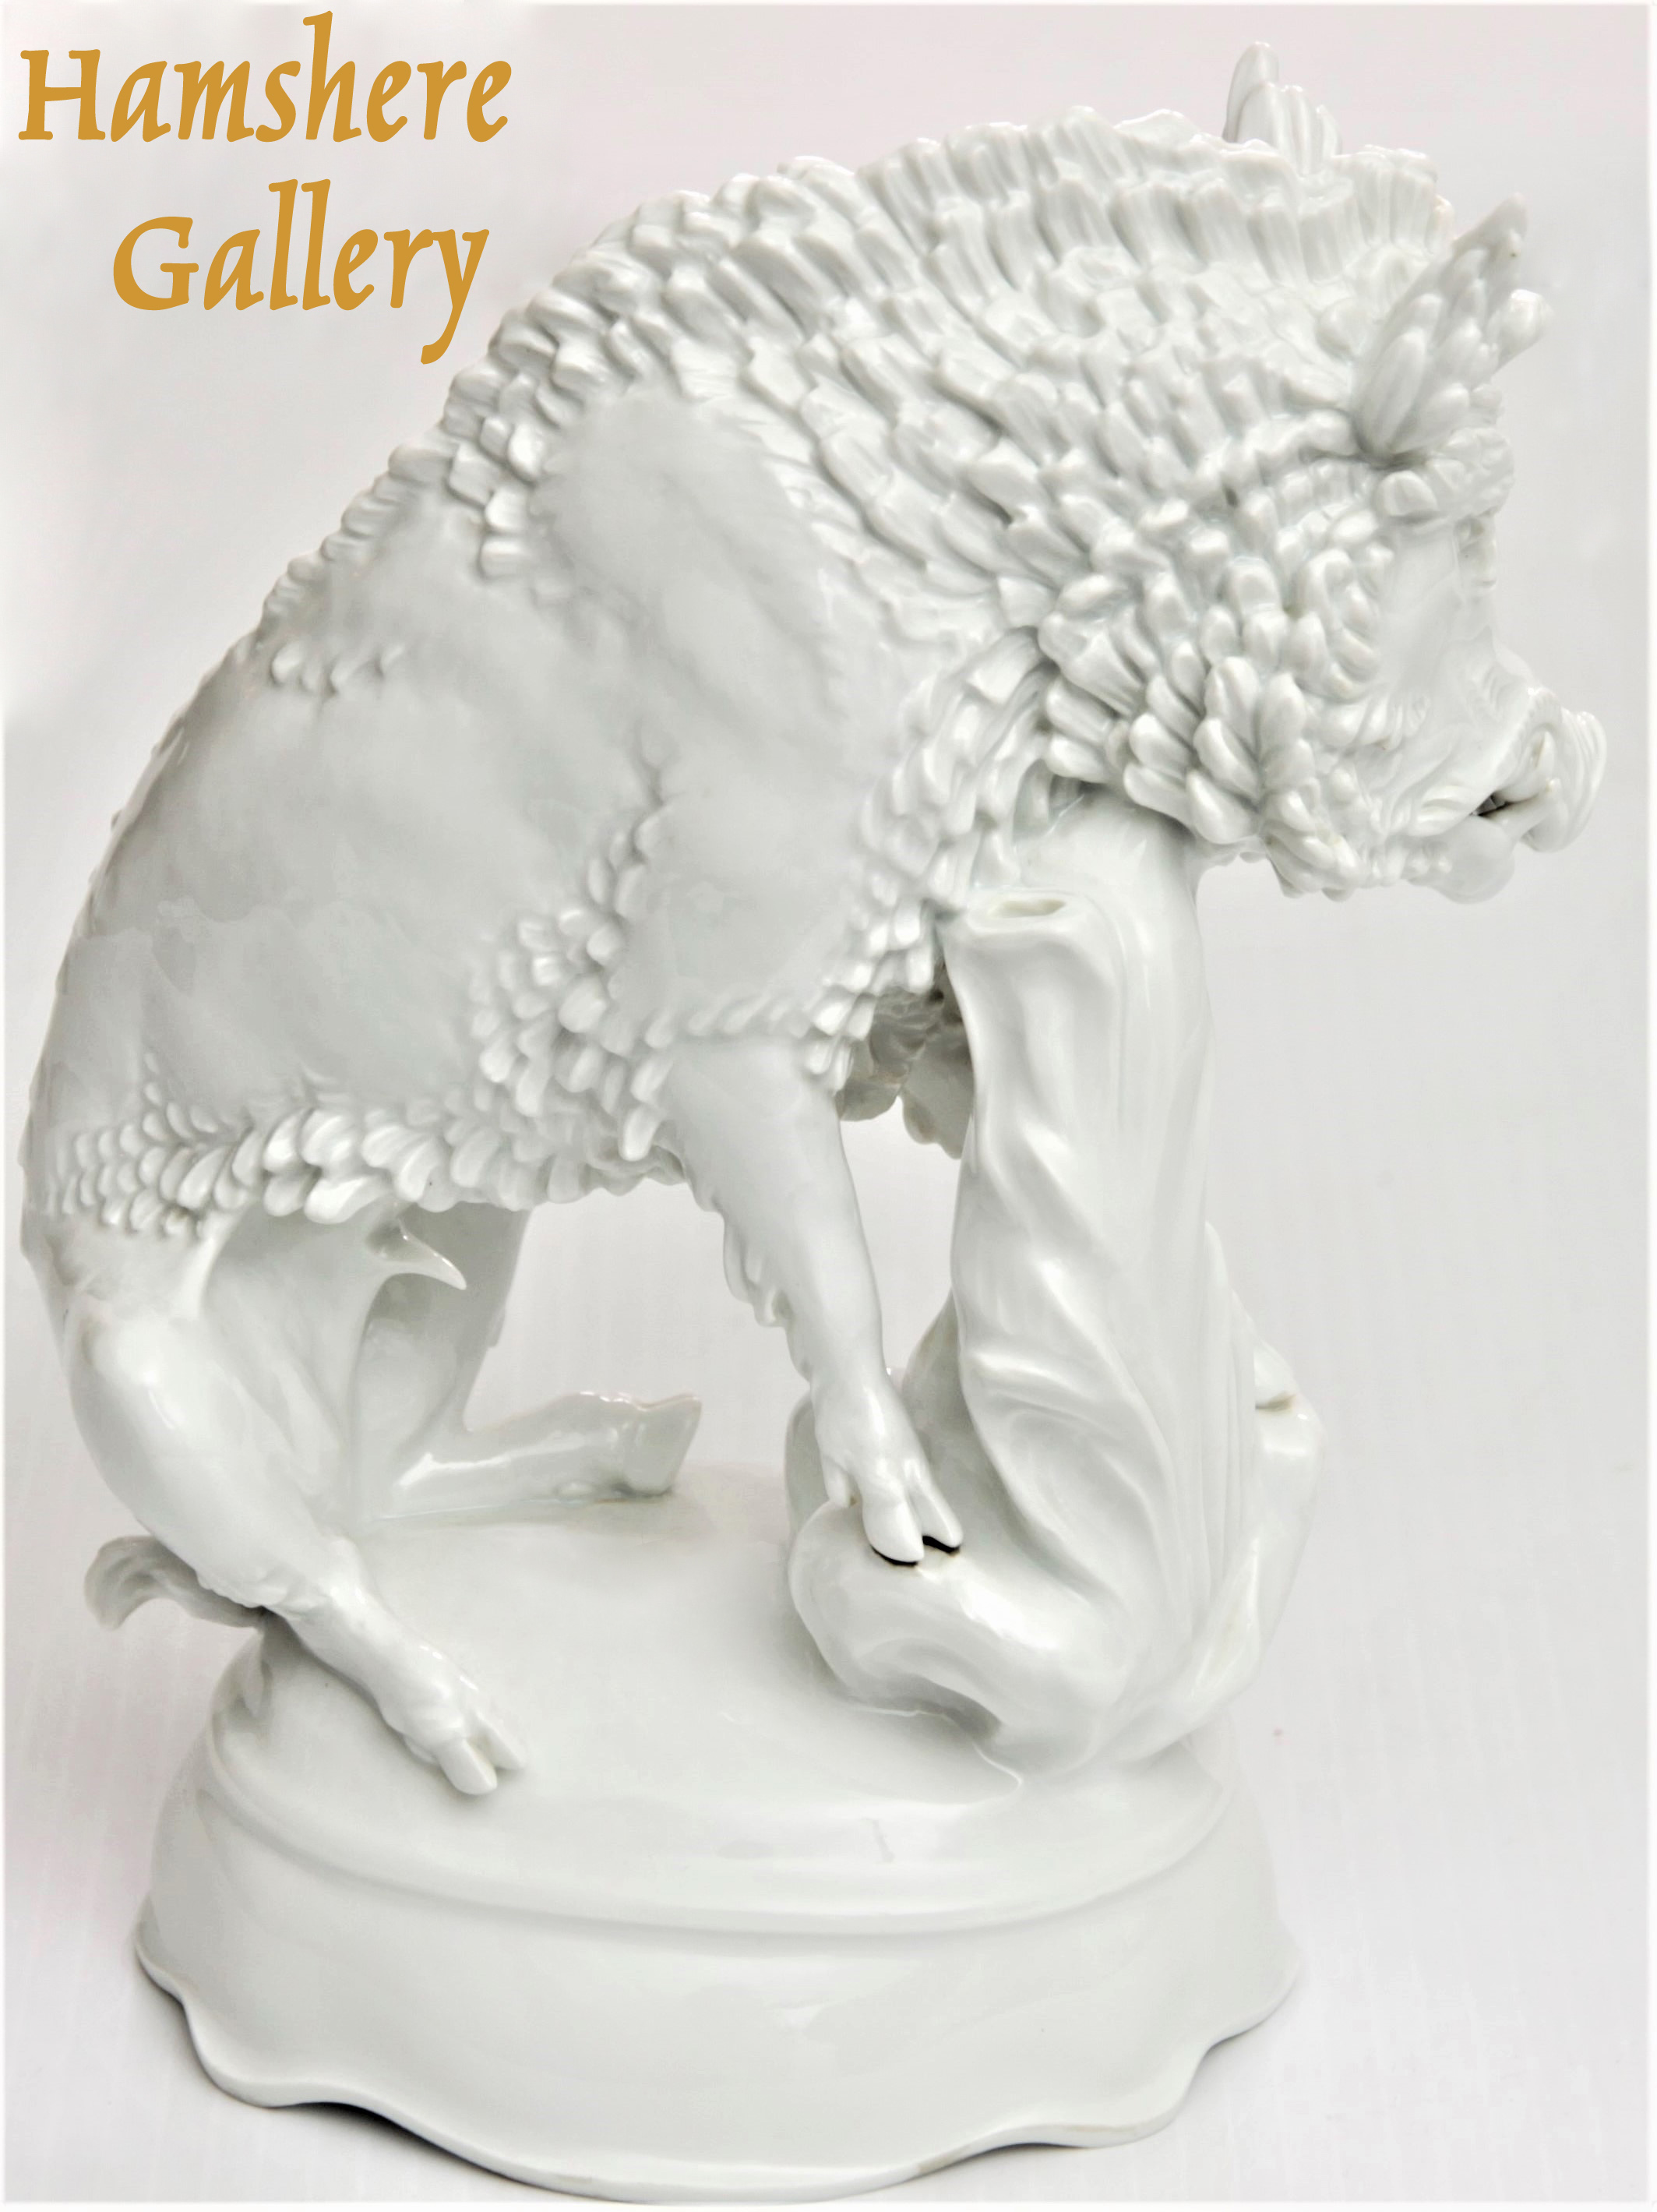 Click for larger image: Early 20th century Meissen boar after Max Esser, (German, 1885 – 1943) - Early 20th century Meissen boar after Max Esser, (German, 1885 – 1943)